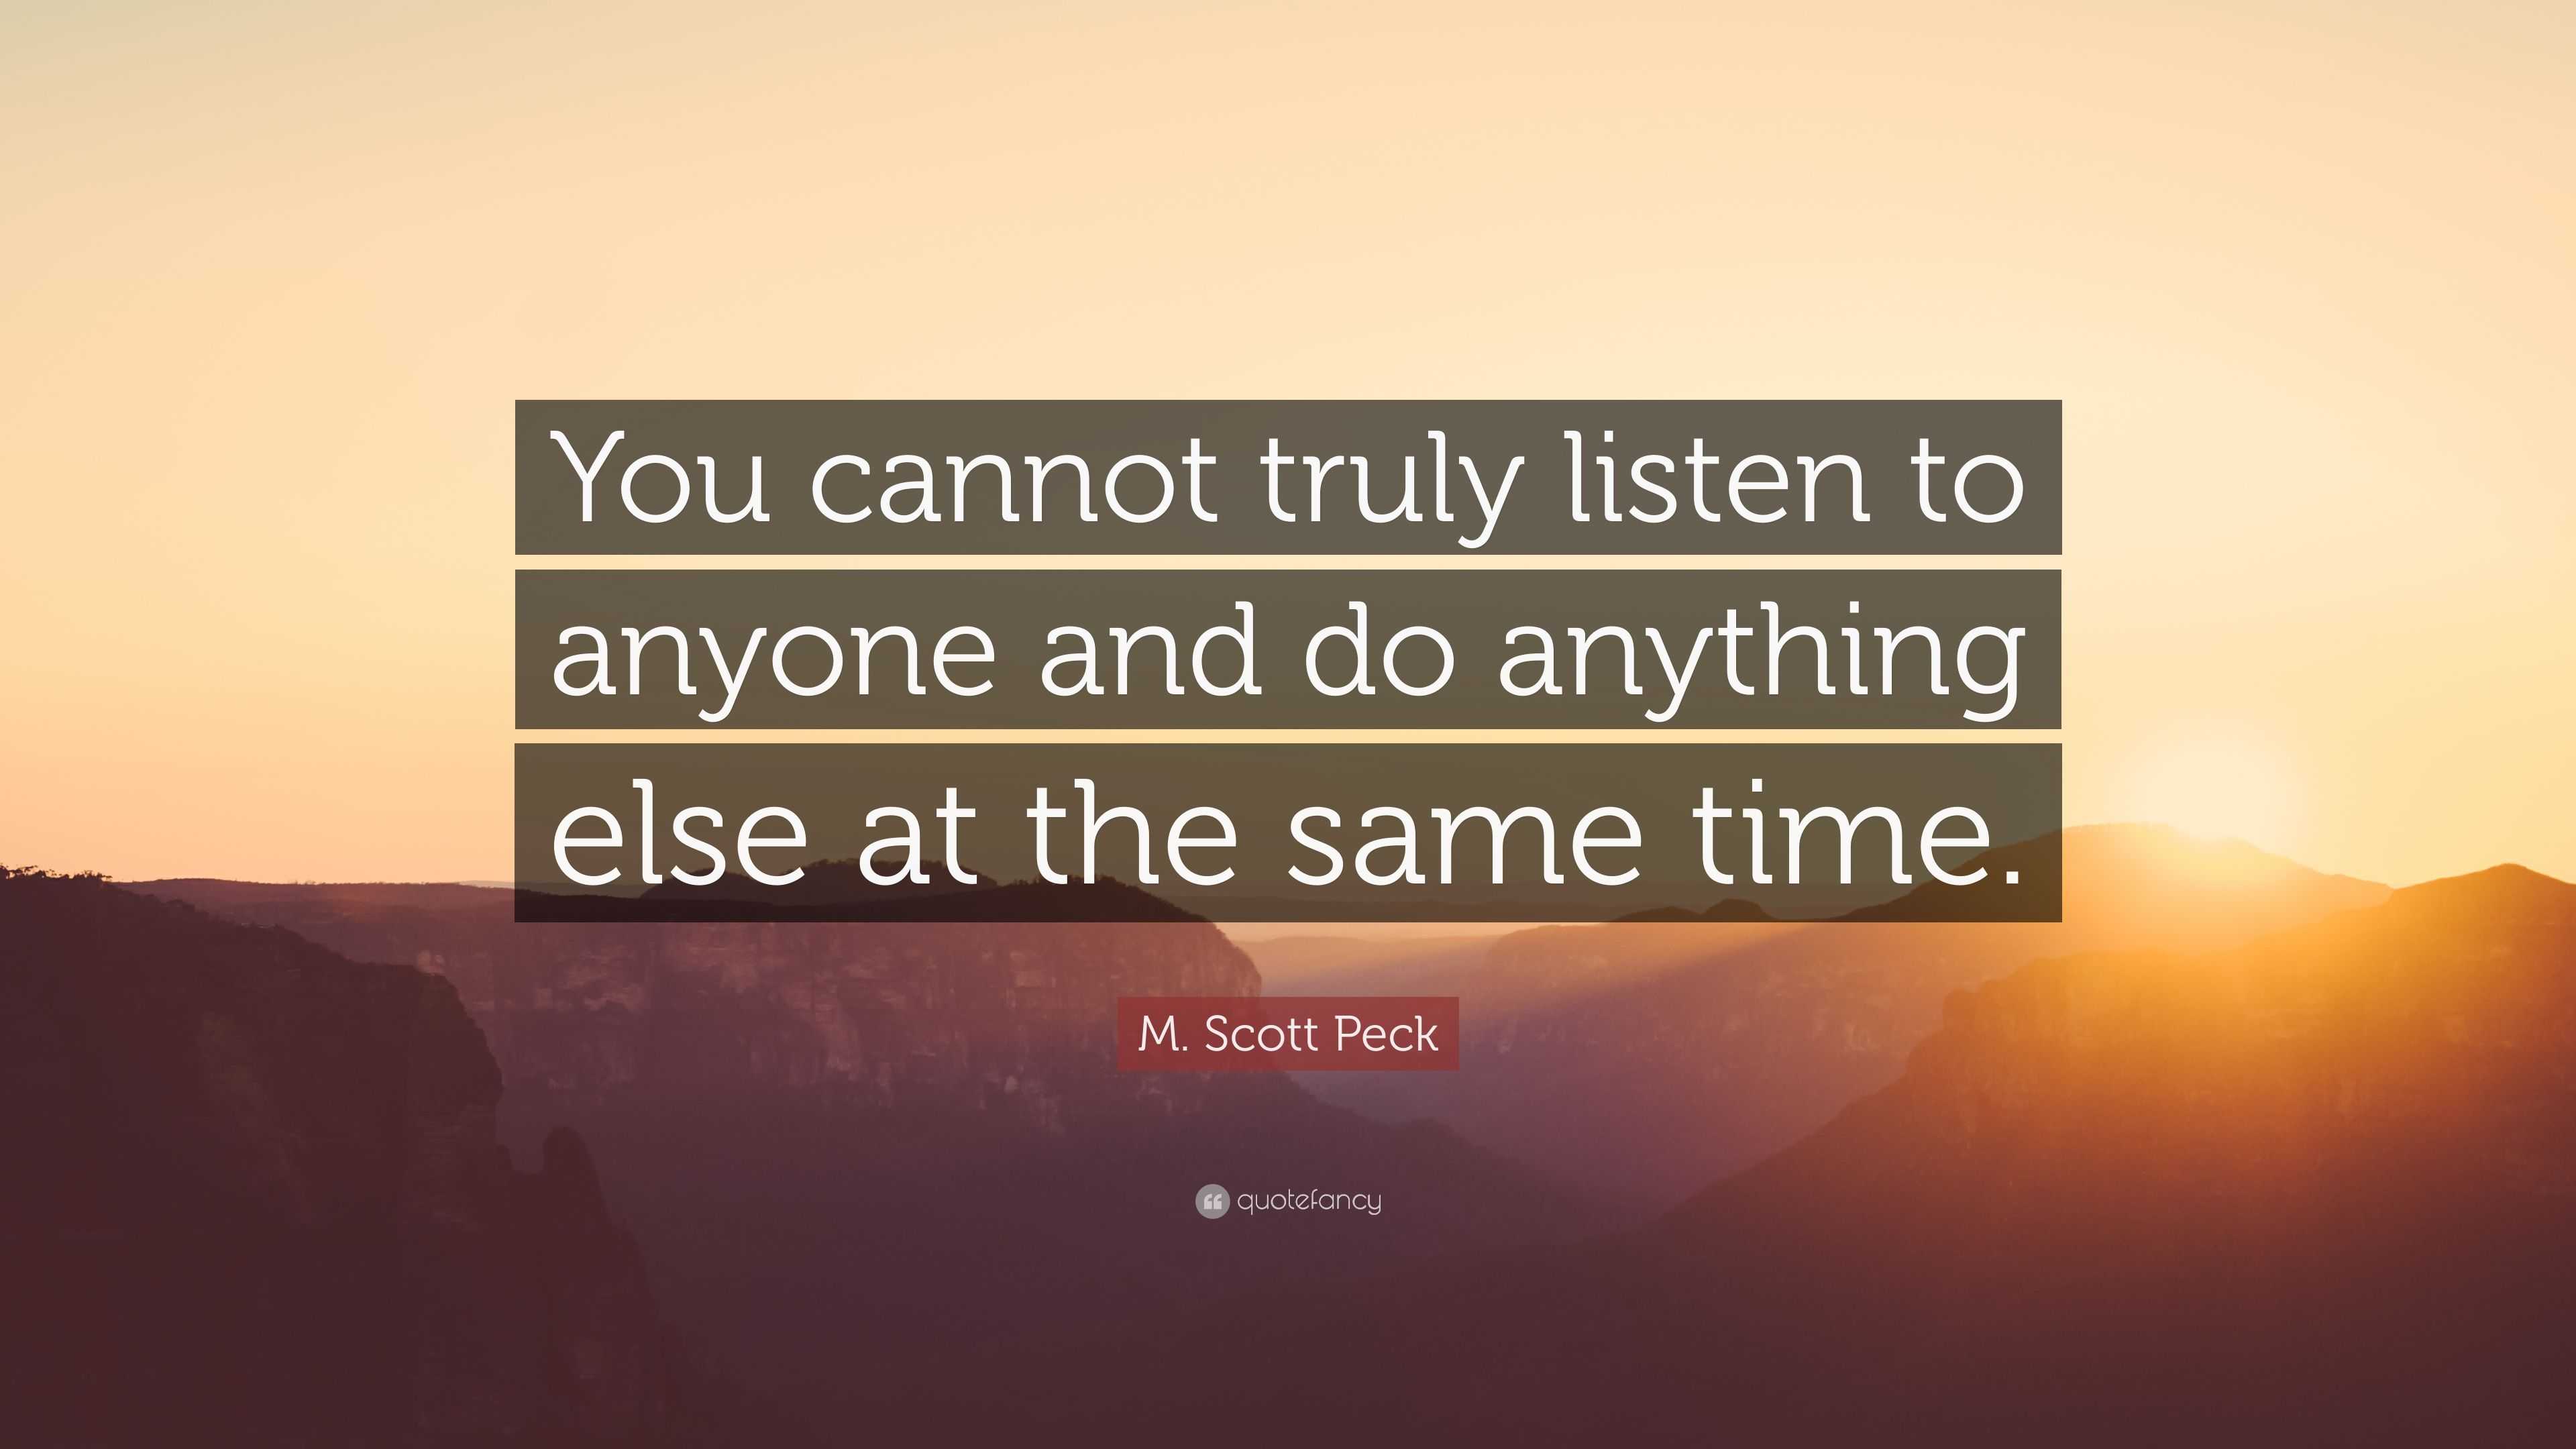 M. Scott Peck Quote: “You cannot truly listen to anyone and do anything ...